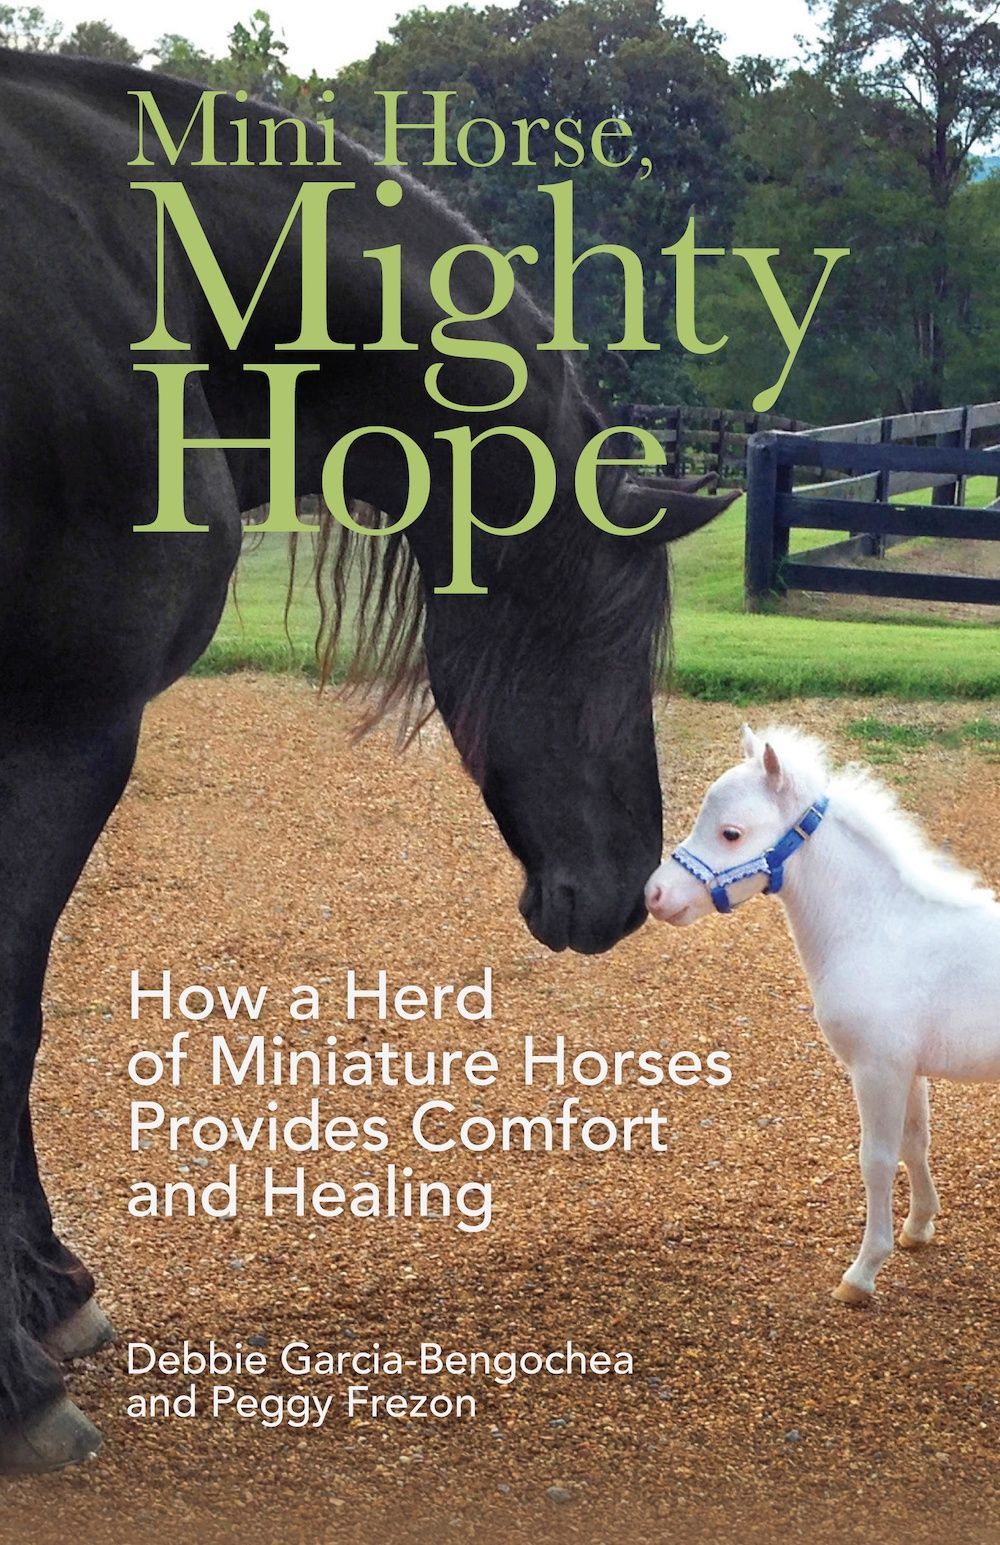 Equine, Minis With A Mission